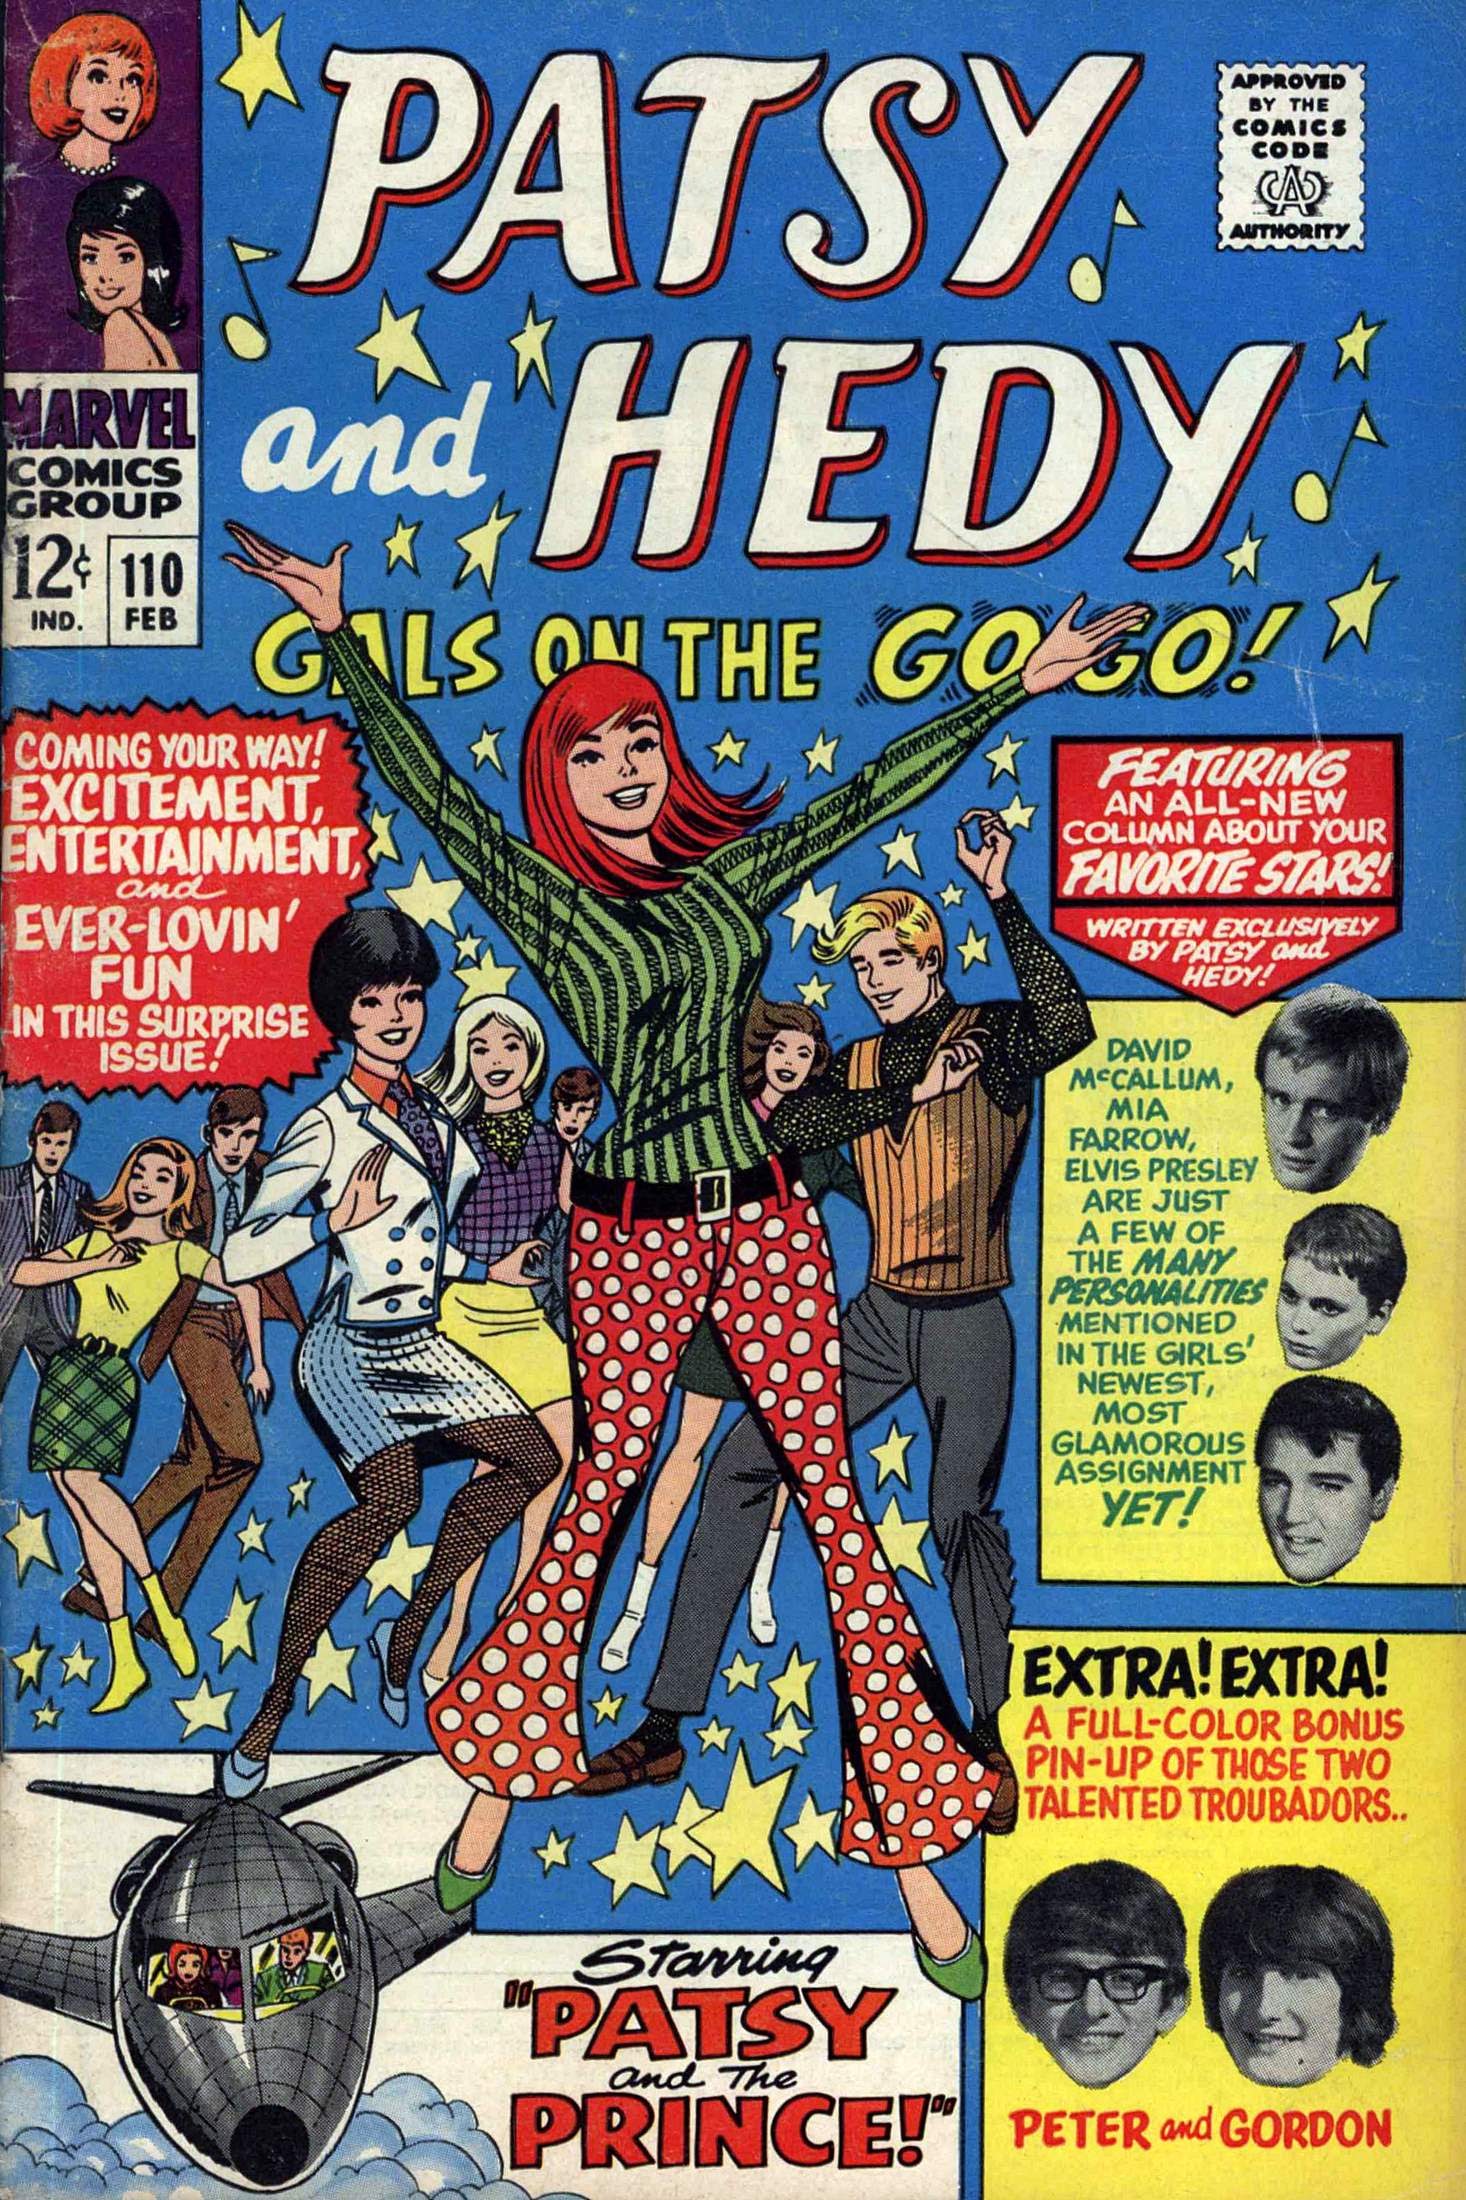 Read online Patsy and Hedy comic -  Issue #110 - 1